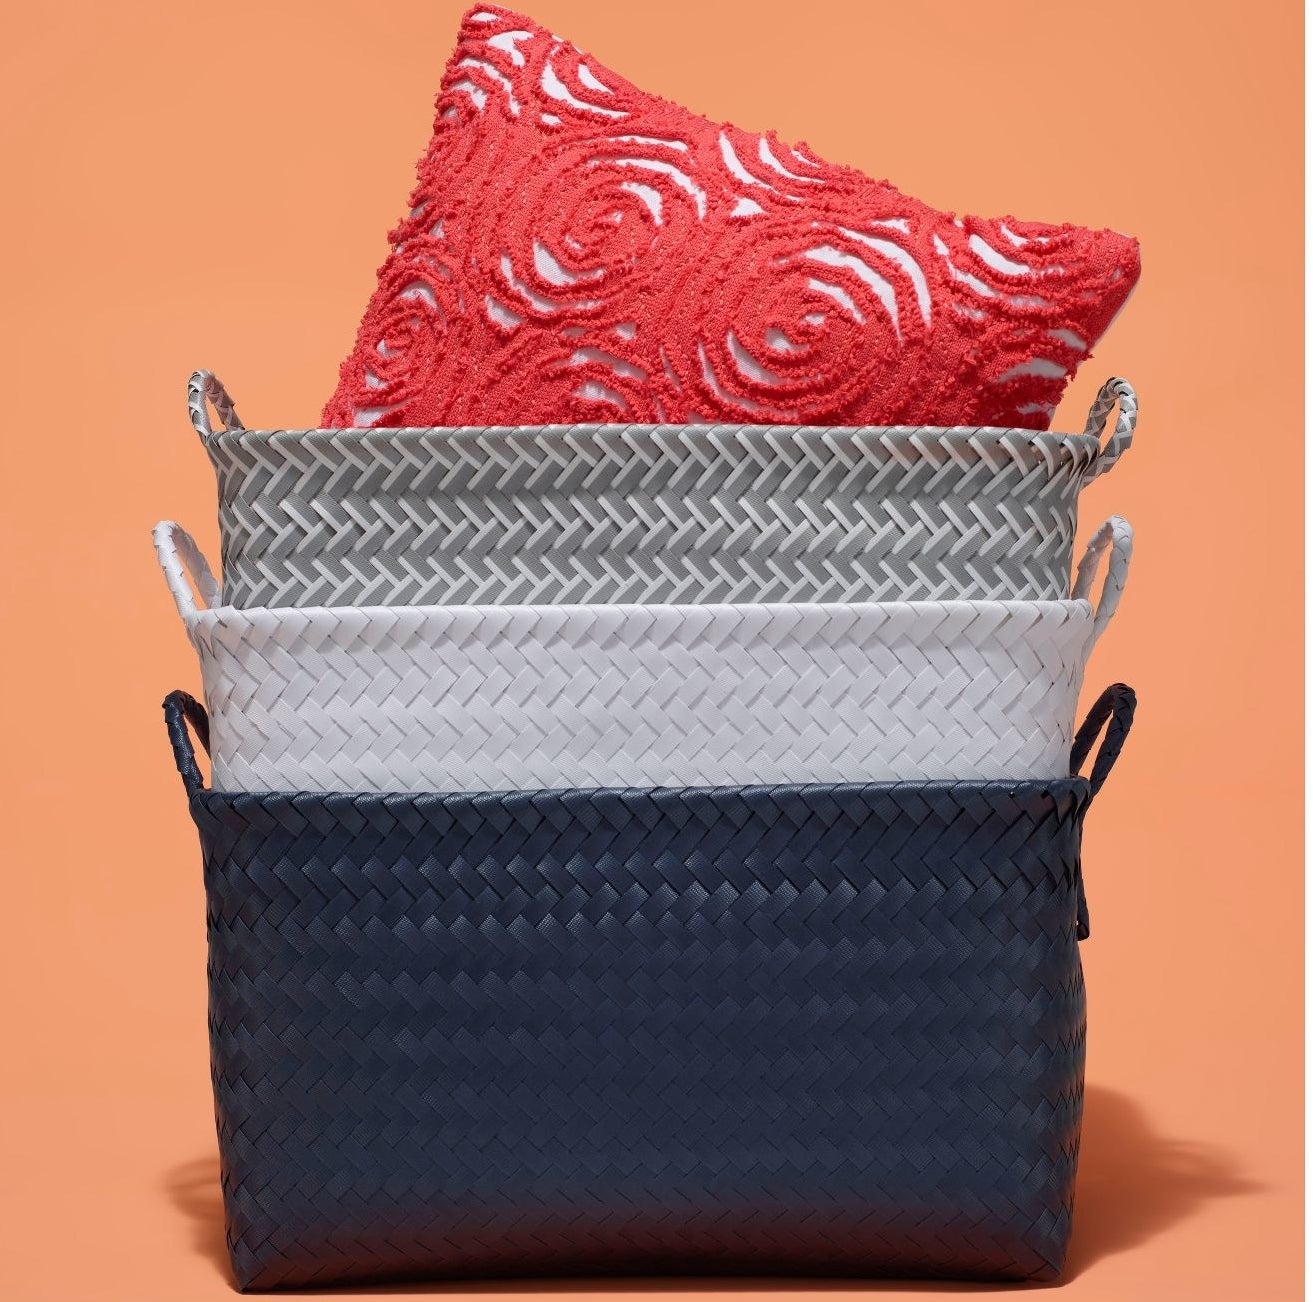 The woven rectangular baskets in navy, white, and gray in a stack with a throw pillow in the top one